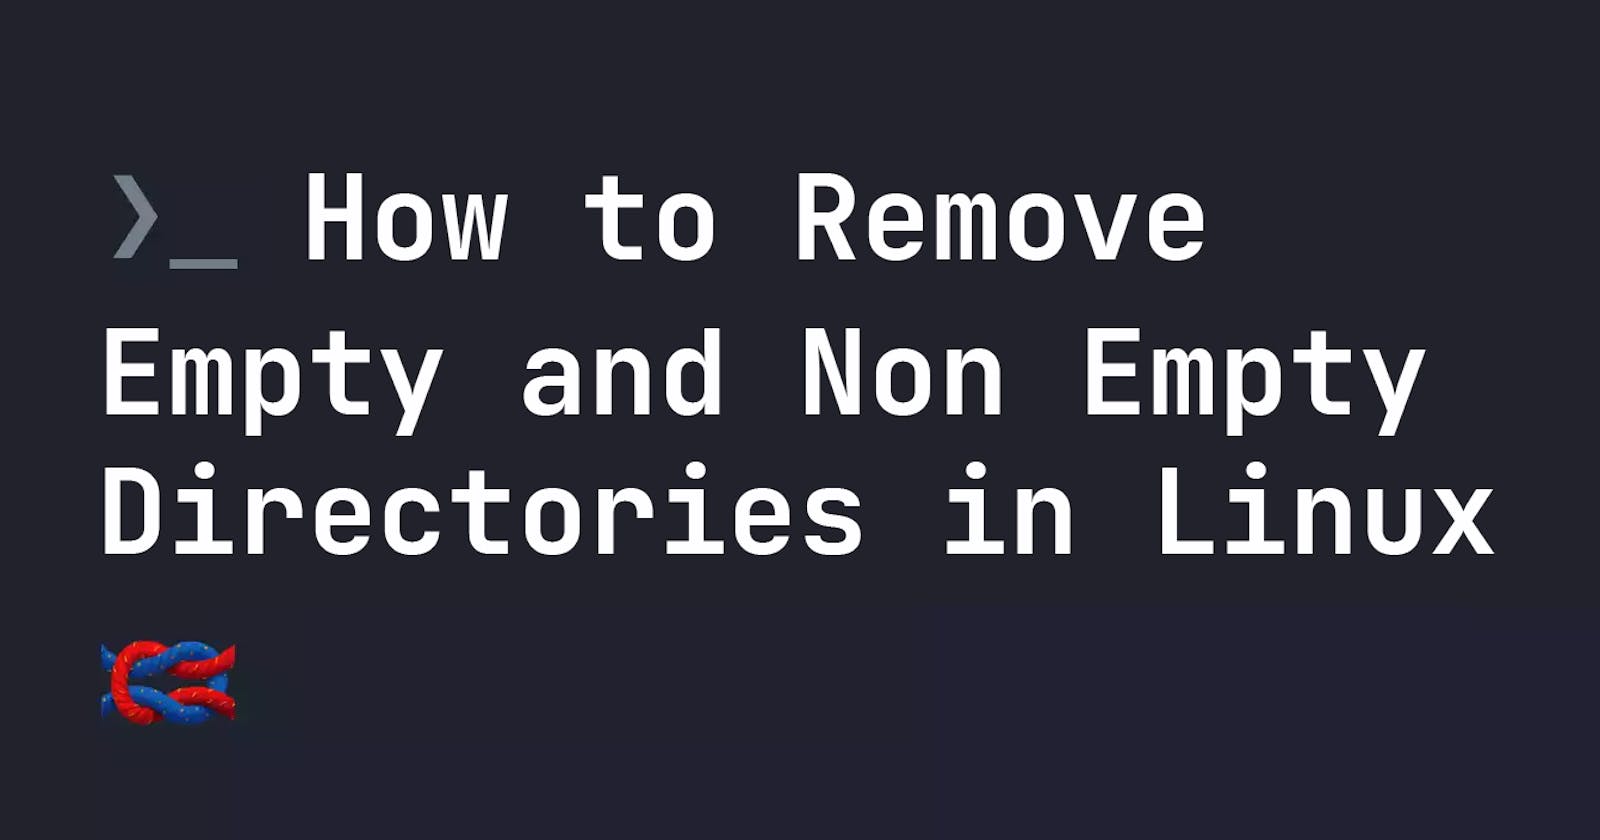 How to Remove Empty and Non Empty Directories in Linux